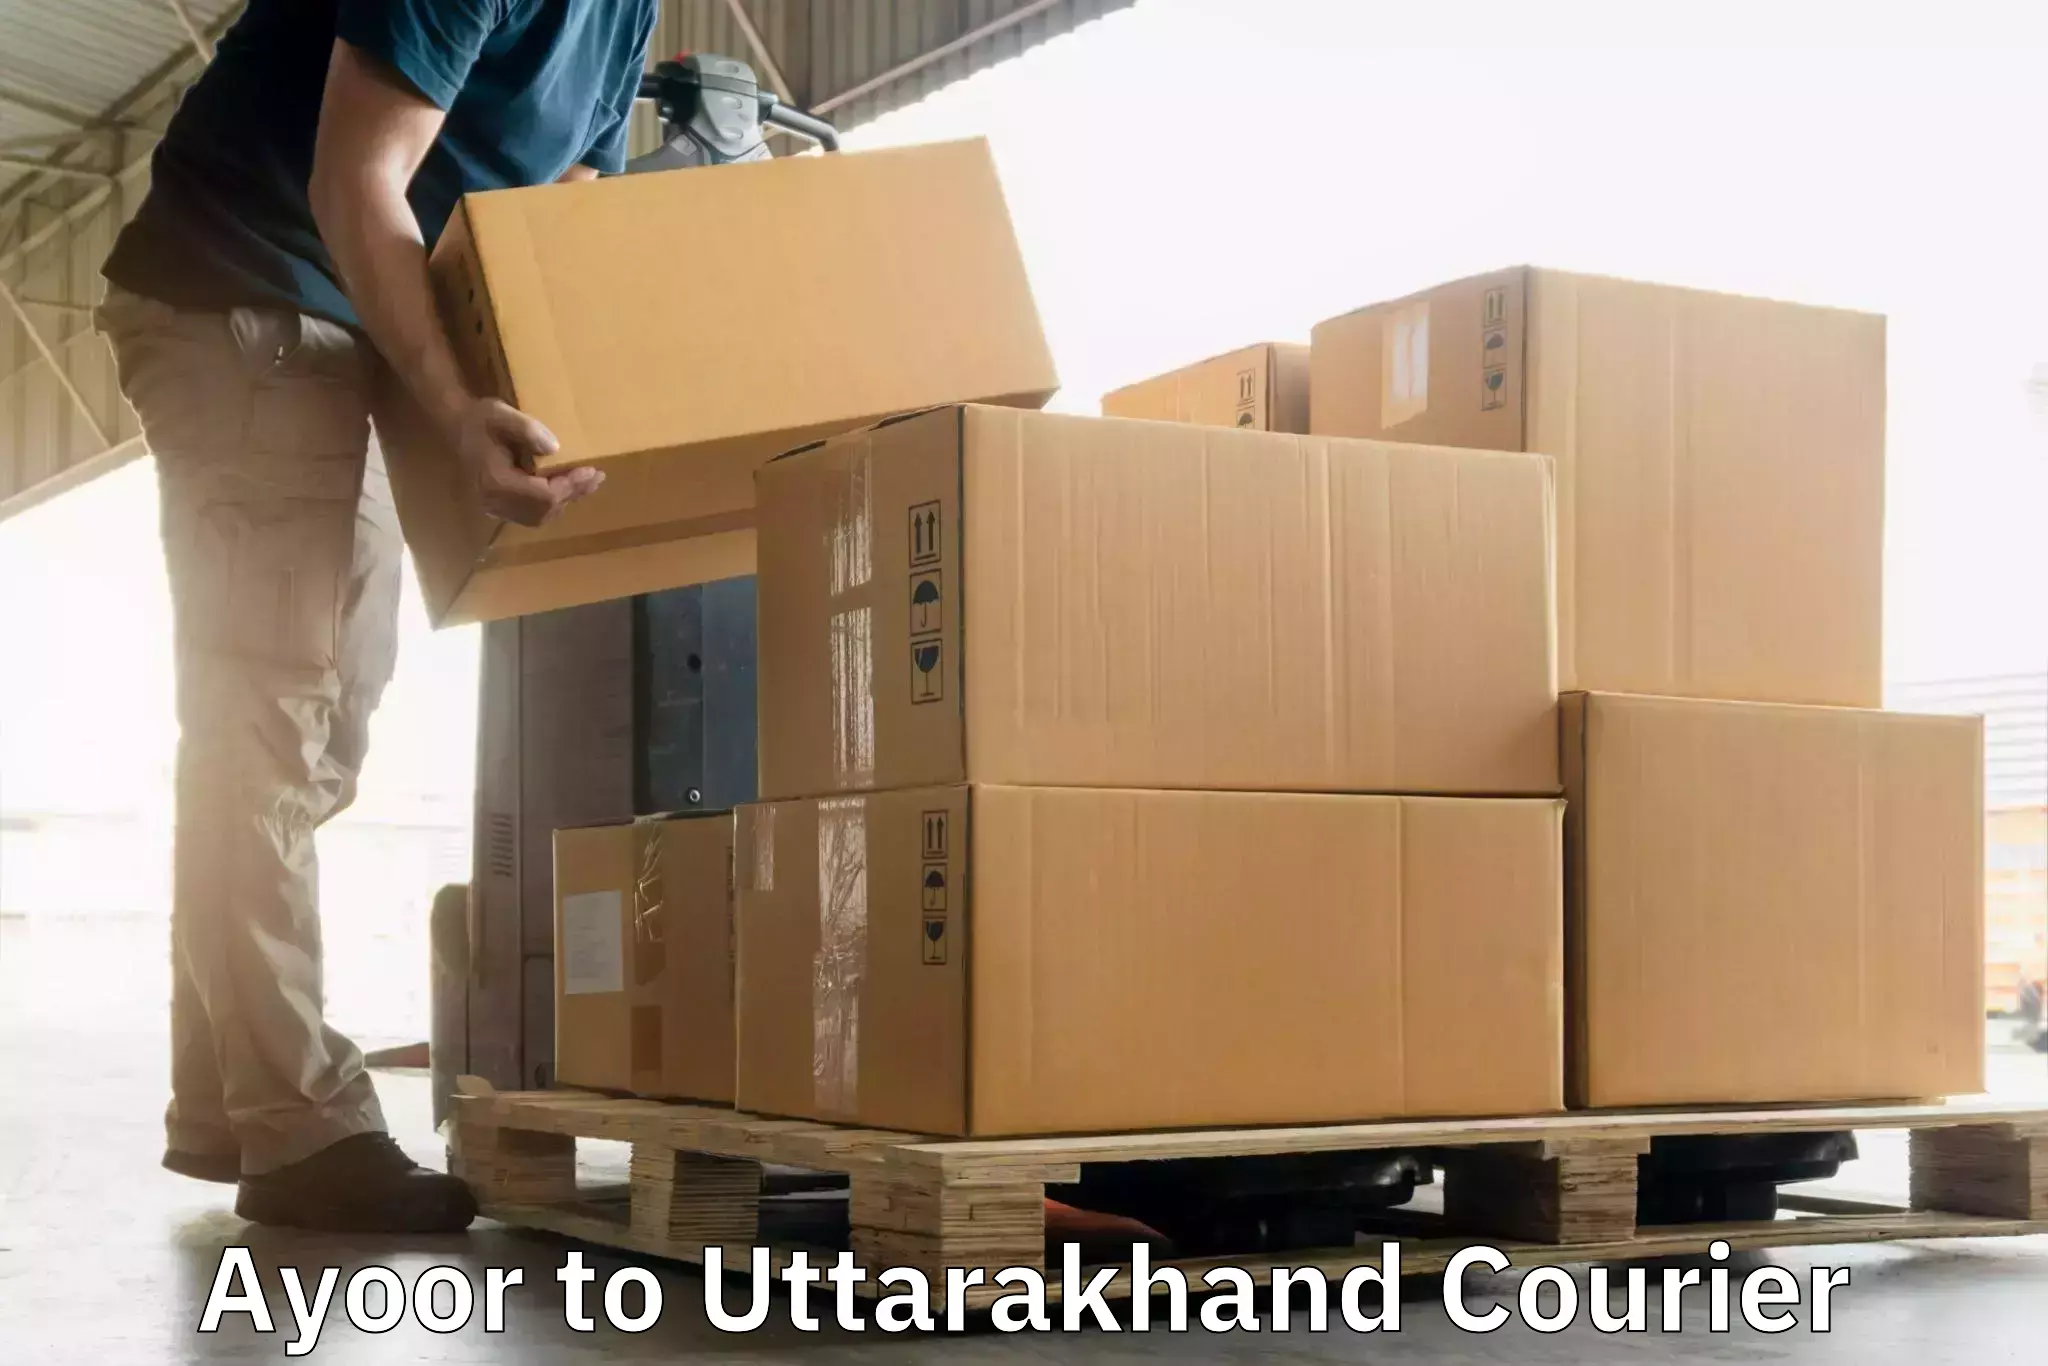 Efficient package consolidation Ayoor to Uttarakhand